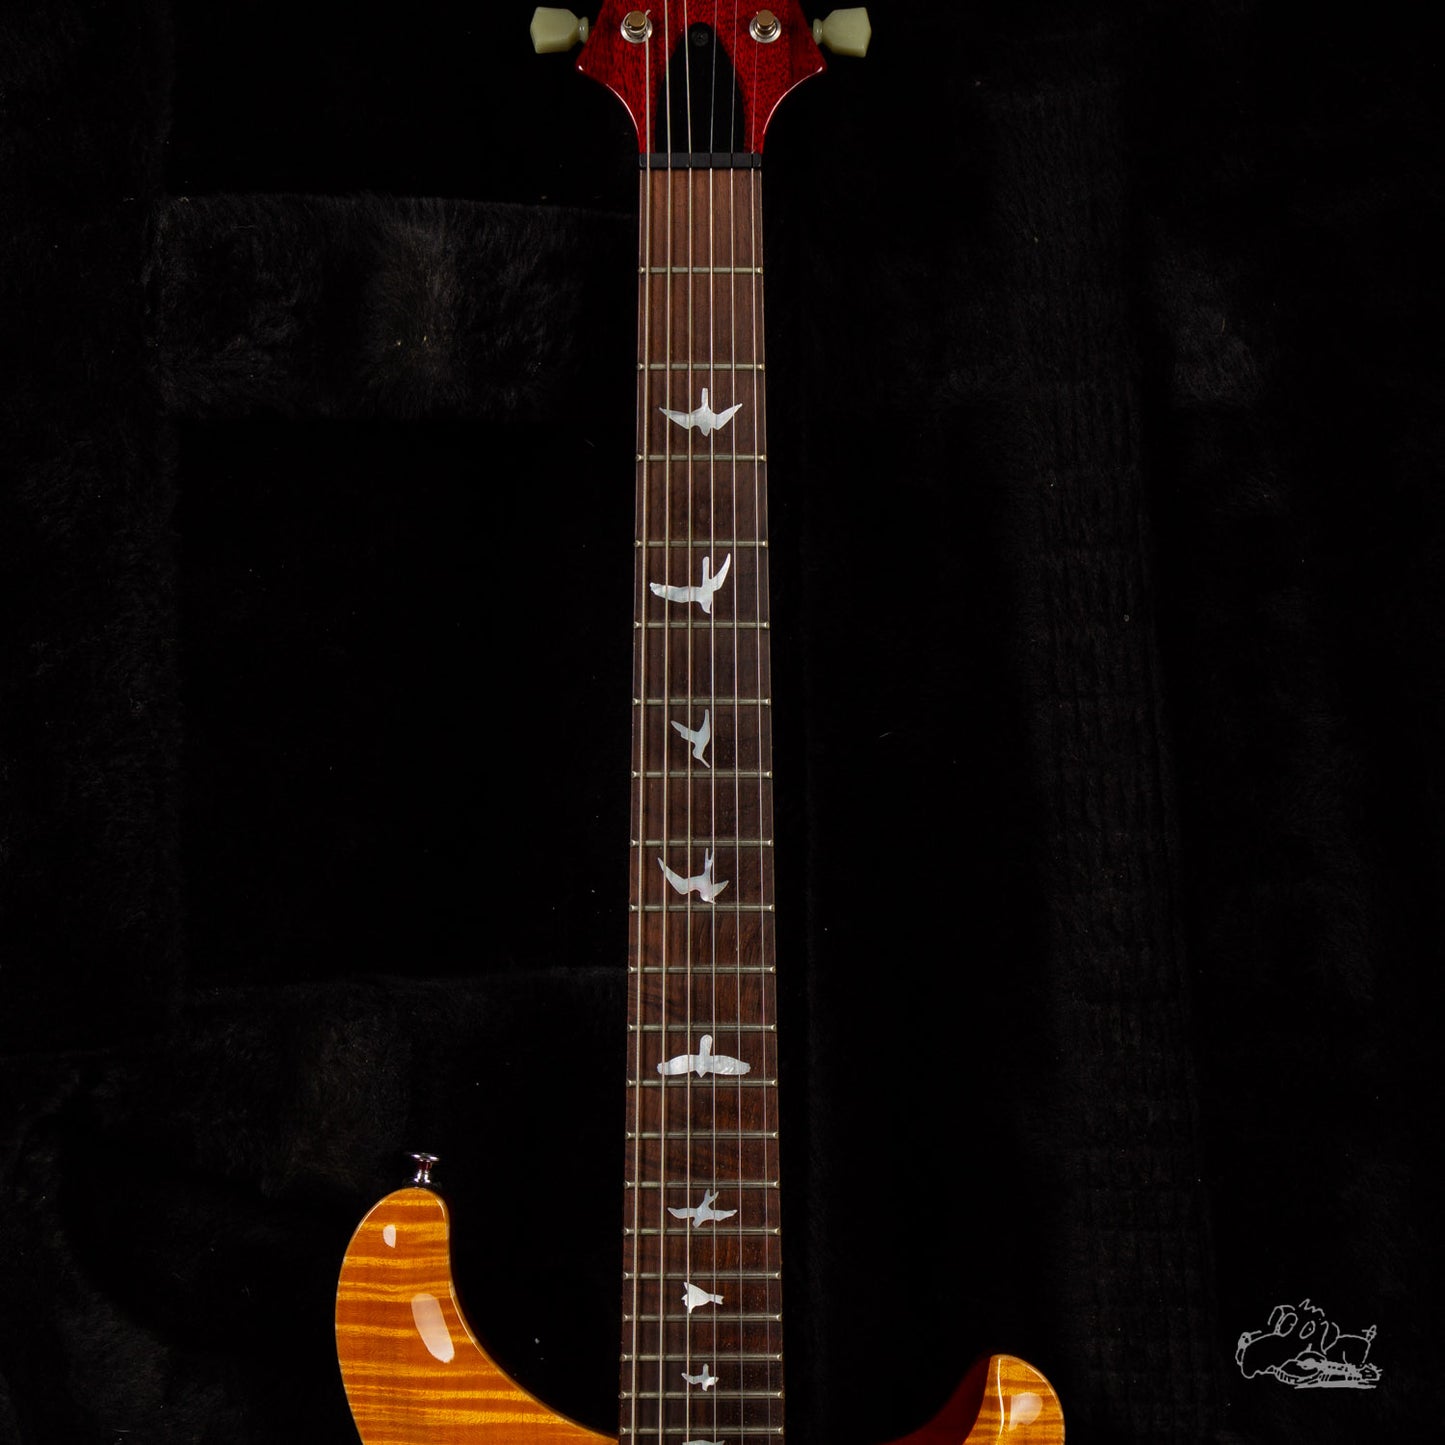 2009 PRS Custom 22 - #9/30 Limited Run for Dave's Guitar Shop - Vintage Yellow - Make an Offer